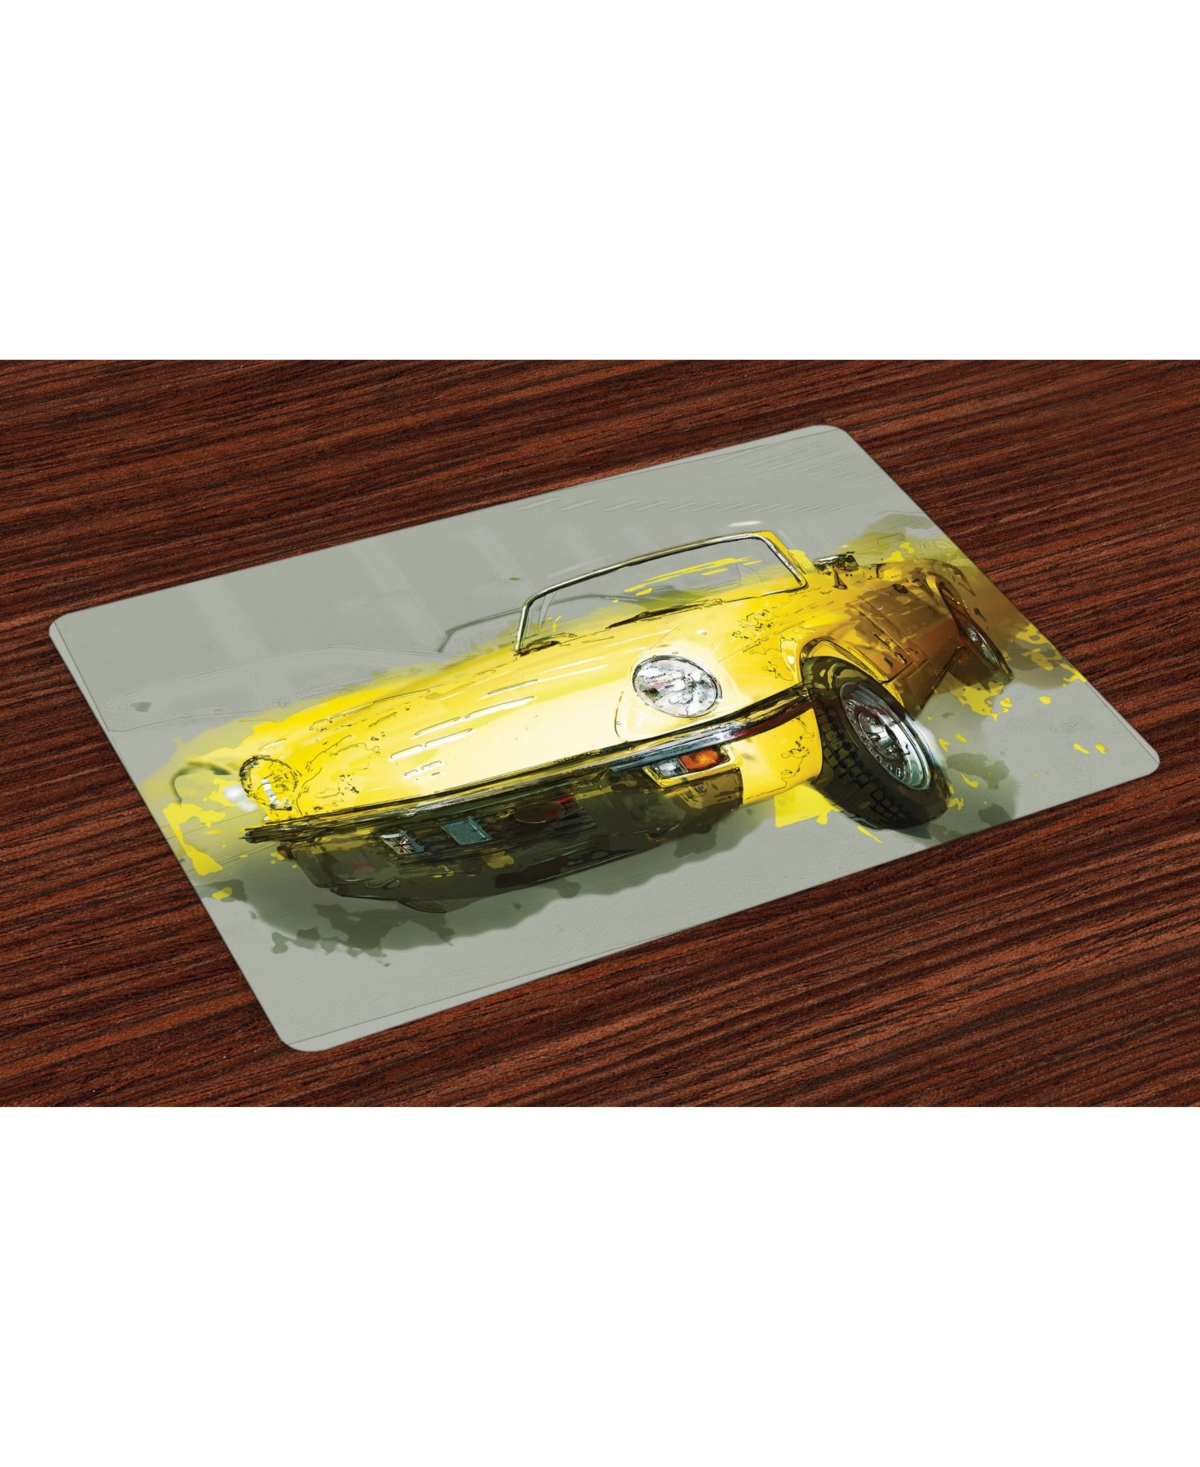 AMBESONNE CAR PLACE MATS, SET OF 4